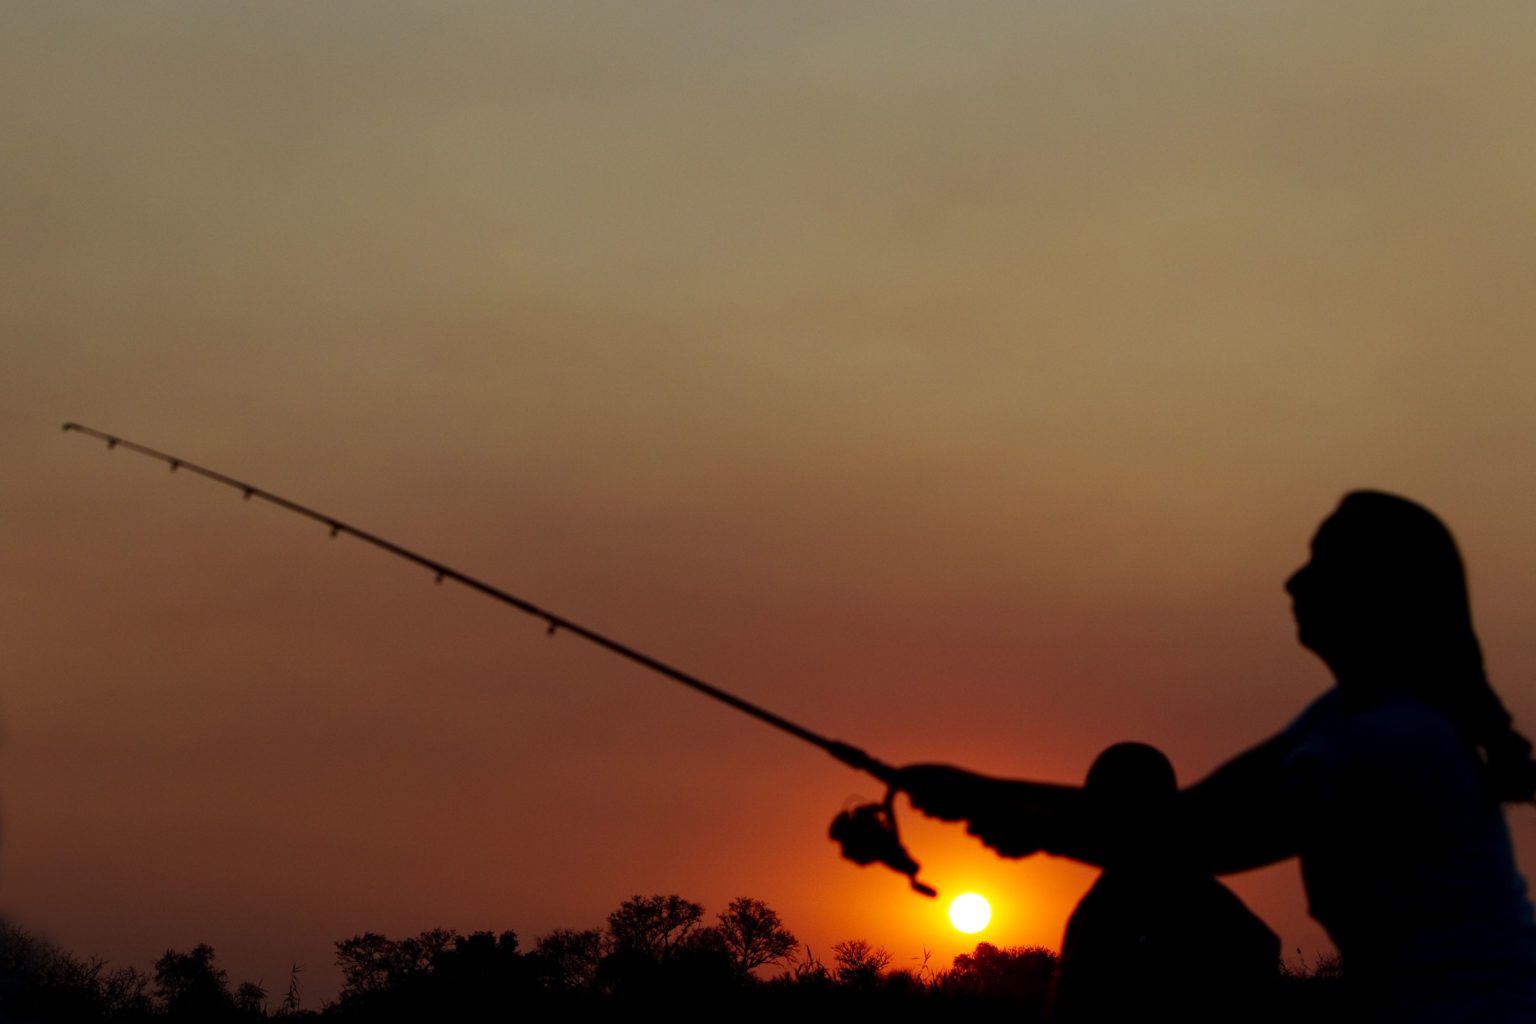 While on our Botswana safari try your hand at Okavango Delta fishing at sunrise